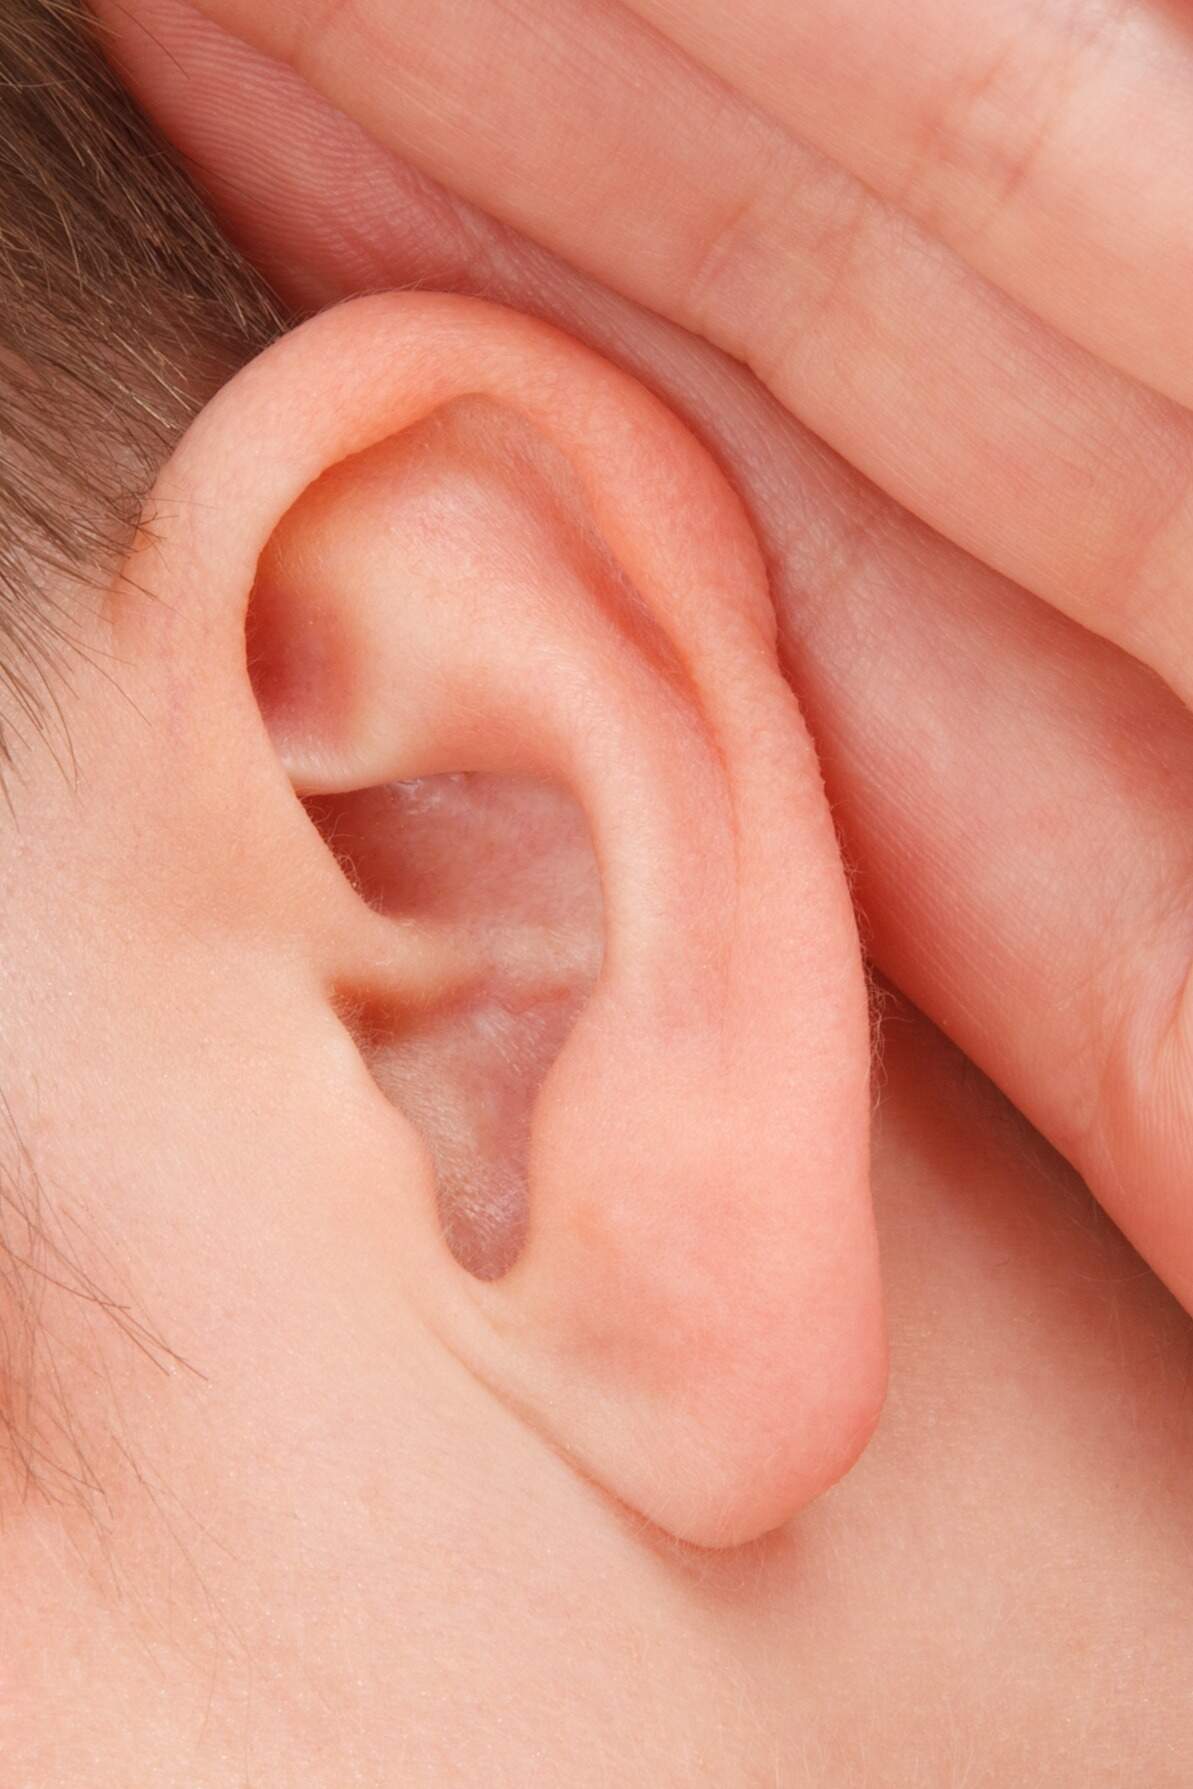 Image for National Protect Your Hearing Month